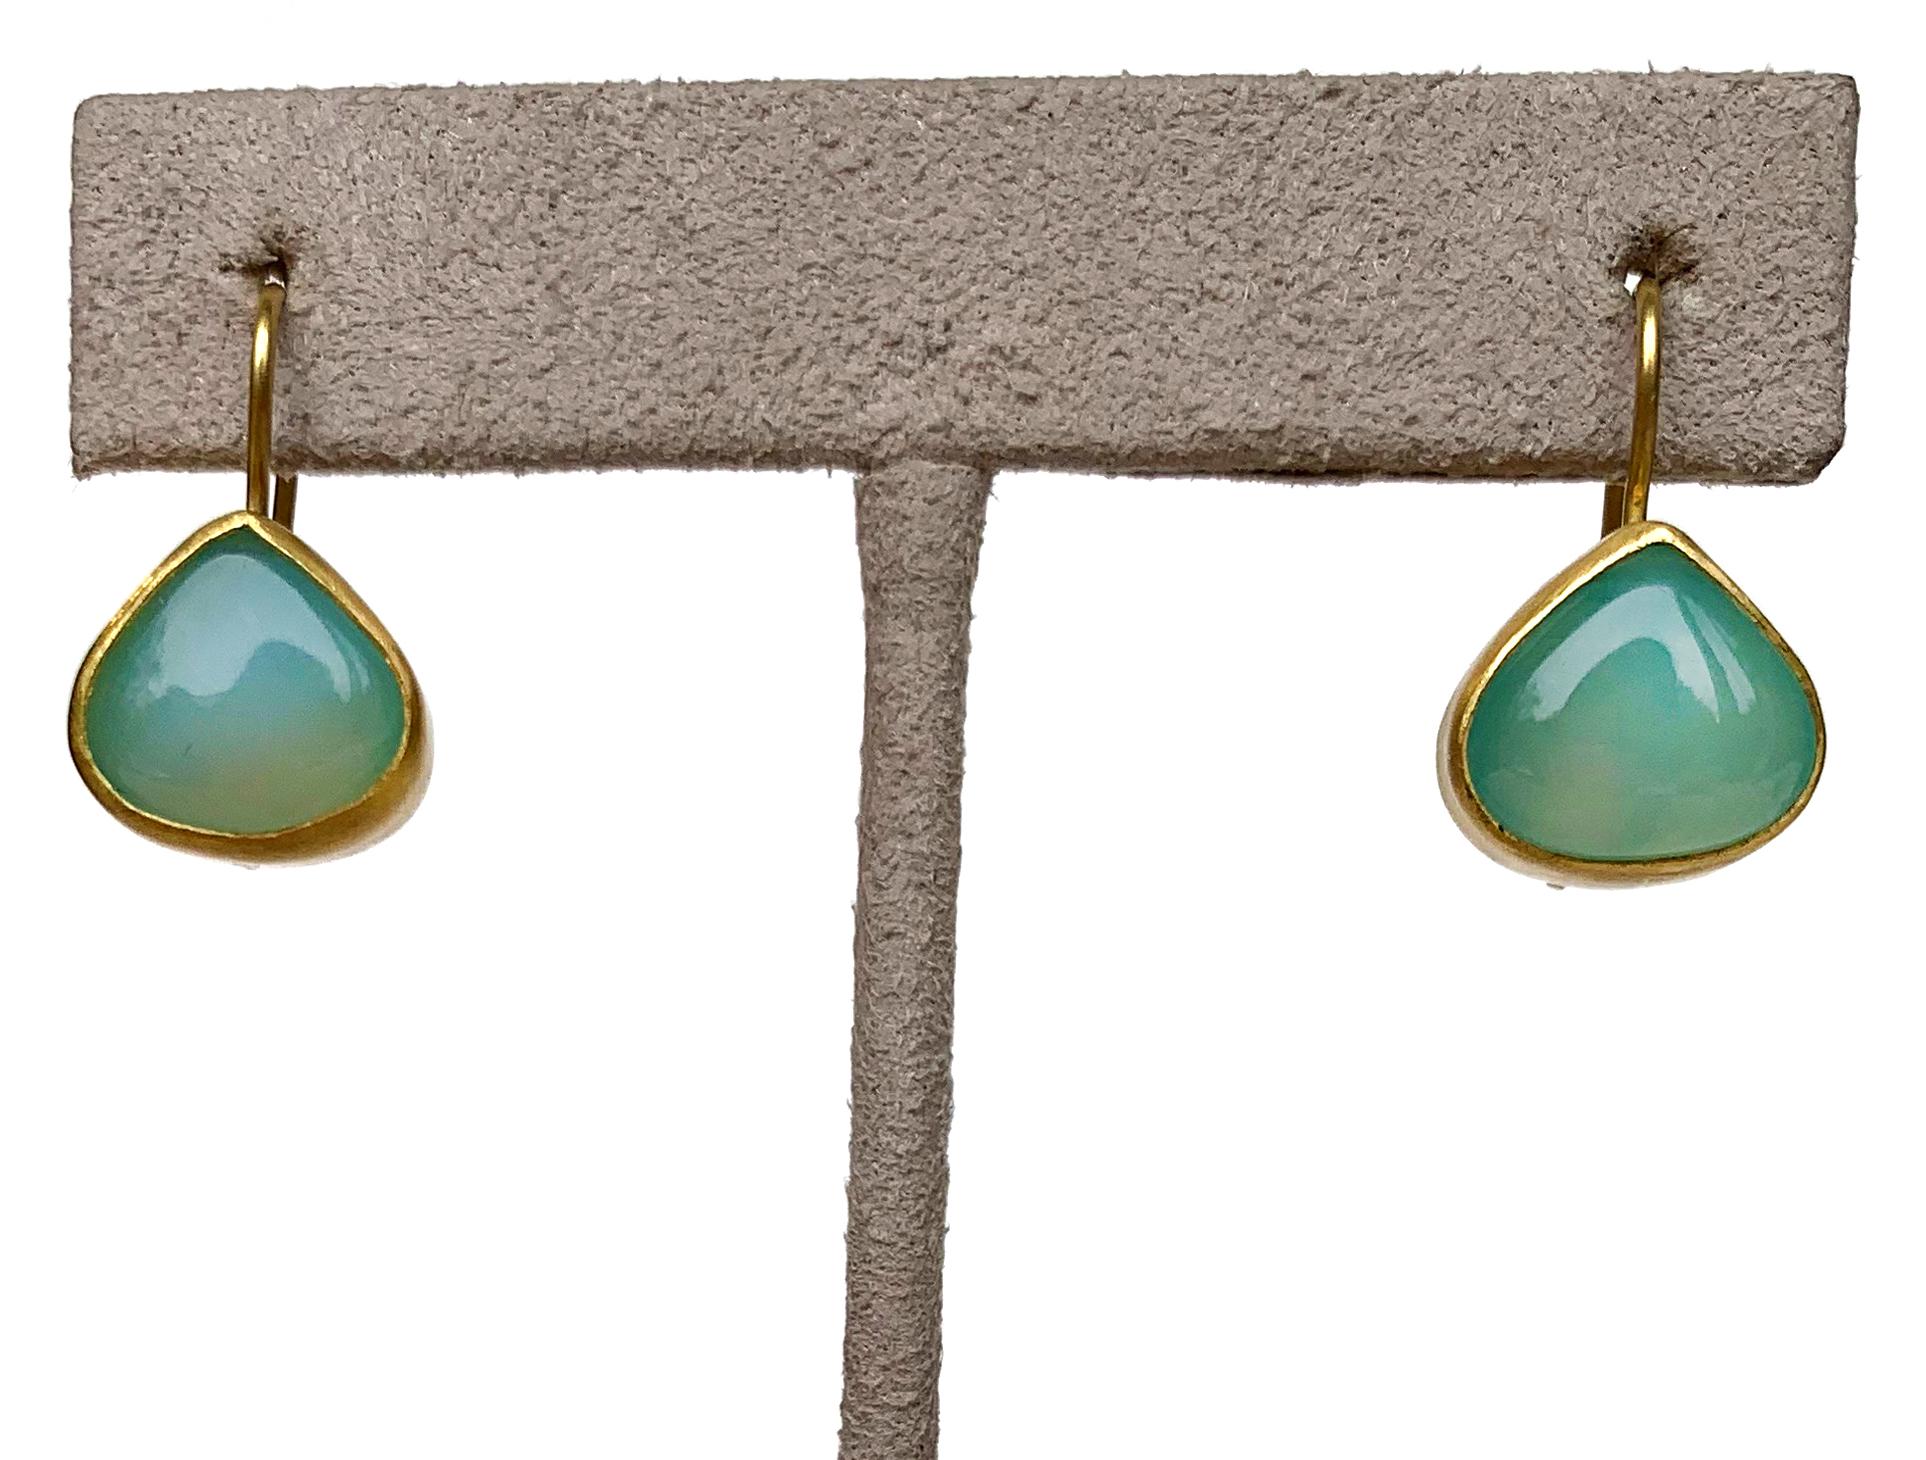 A gemstone that has been used since antiquity, this luminescent pair of chalcedony earrings is set in 22 karat gold with 20 karat gold earwire. Tear drop in shape with a cabachon finish. Entirely made by hand in New York City. 